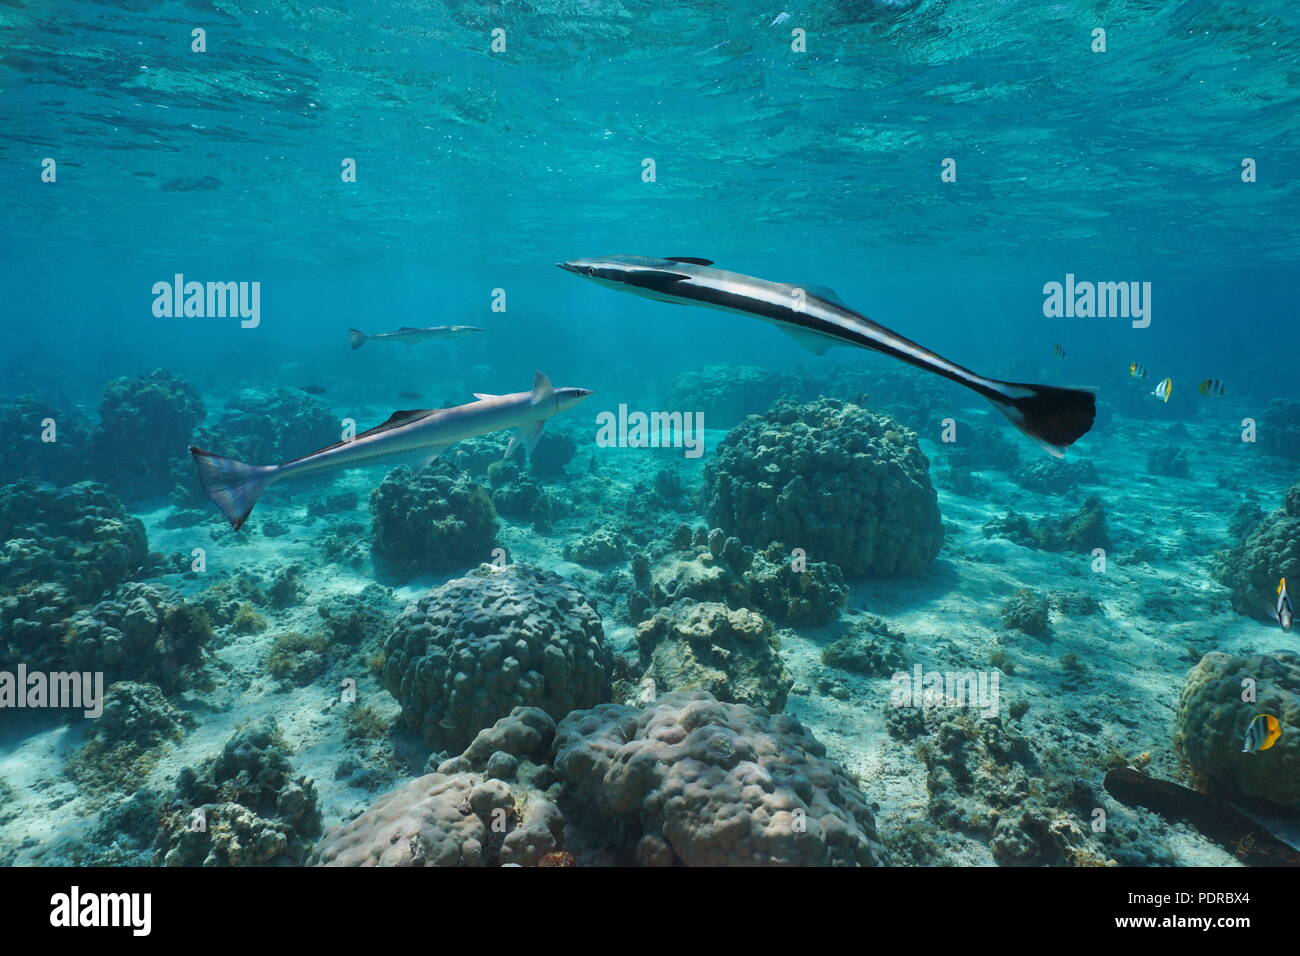 Remora fish live sharksucker, Echeneis naucrates, underwater with corals in the lagoon, Pacific ocean, French Polynesia Stock Photo